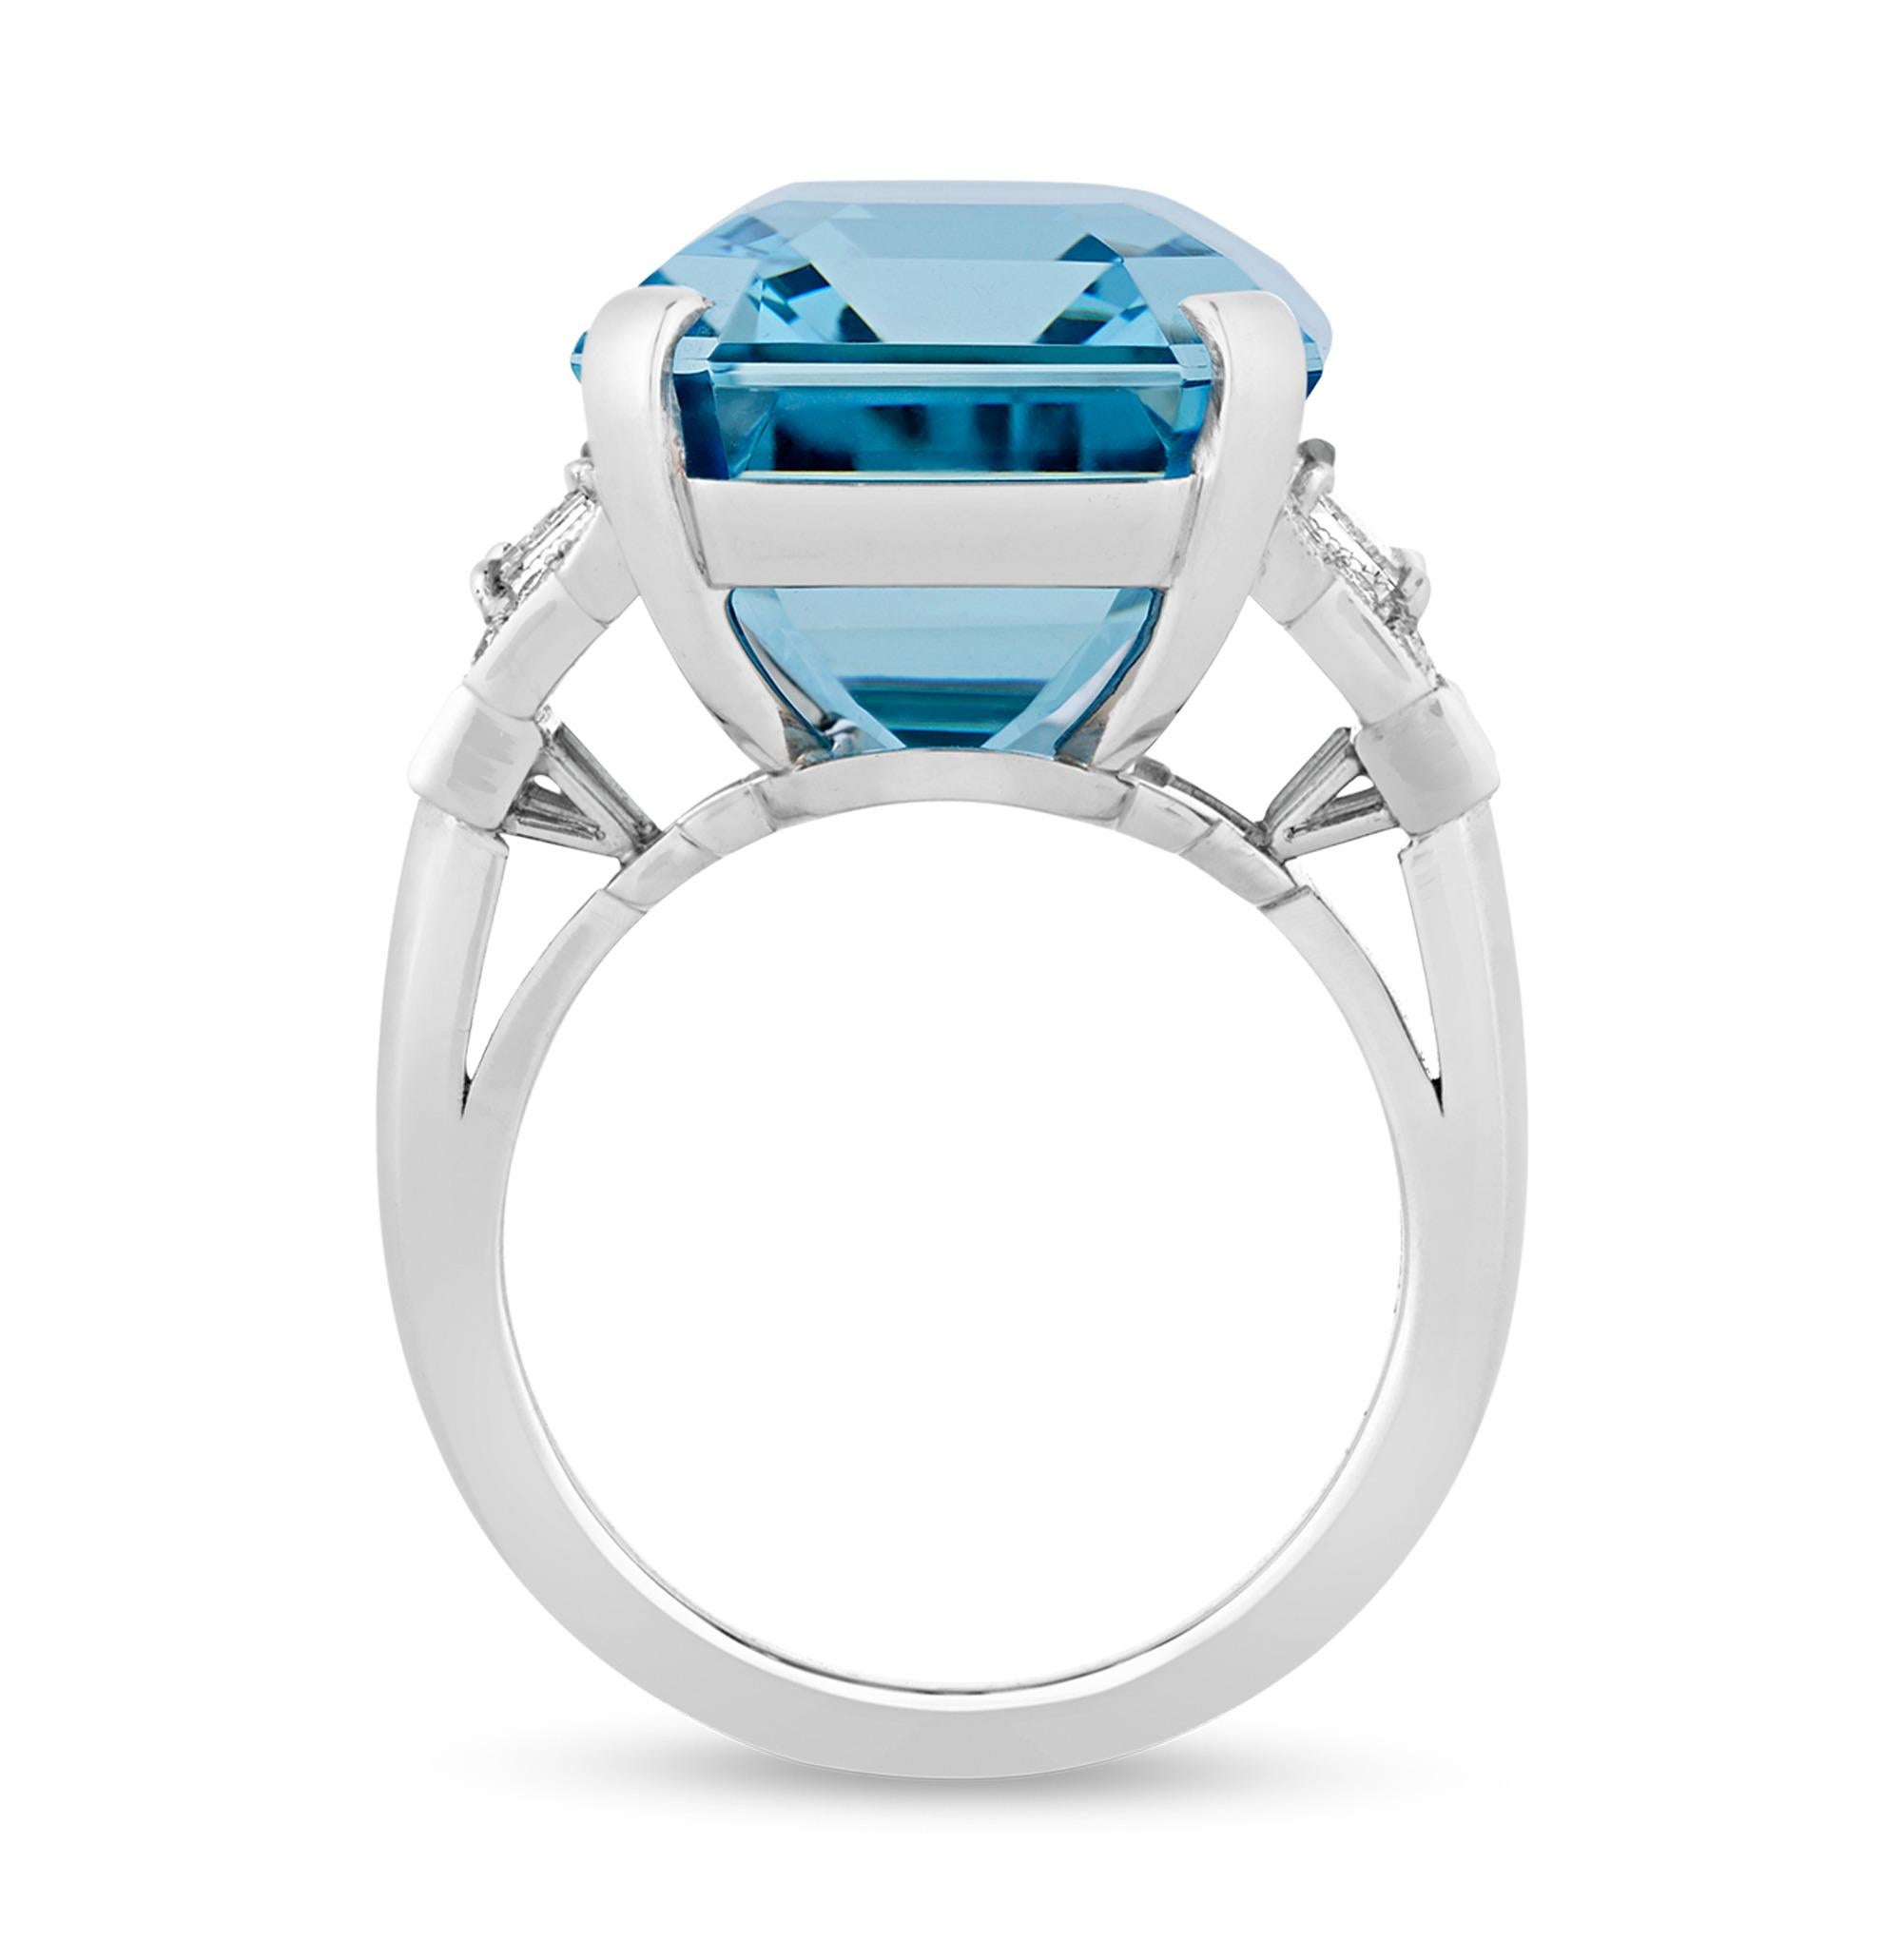 This radiant aquamarine ring, designed by Raymond Yard, is a testament to the designer's unparalleled craftsmanship and innovative design ethos. Crafted in Art Deco style, it features an exquisite 19.29-carat emerald cut aquamarine, encased in a